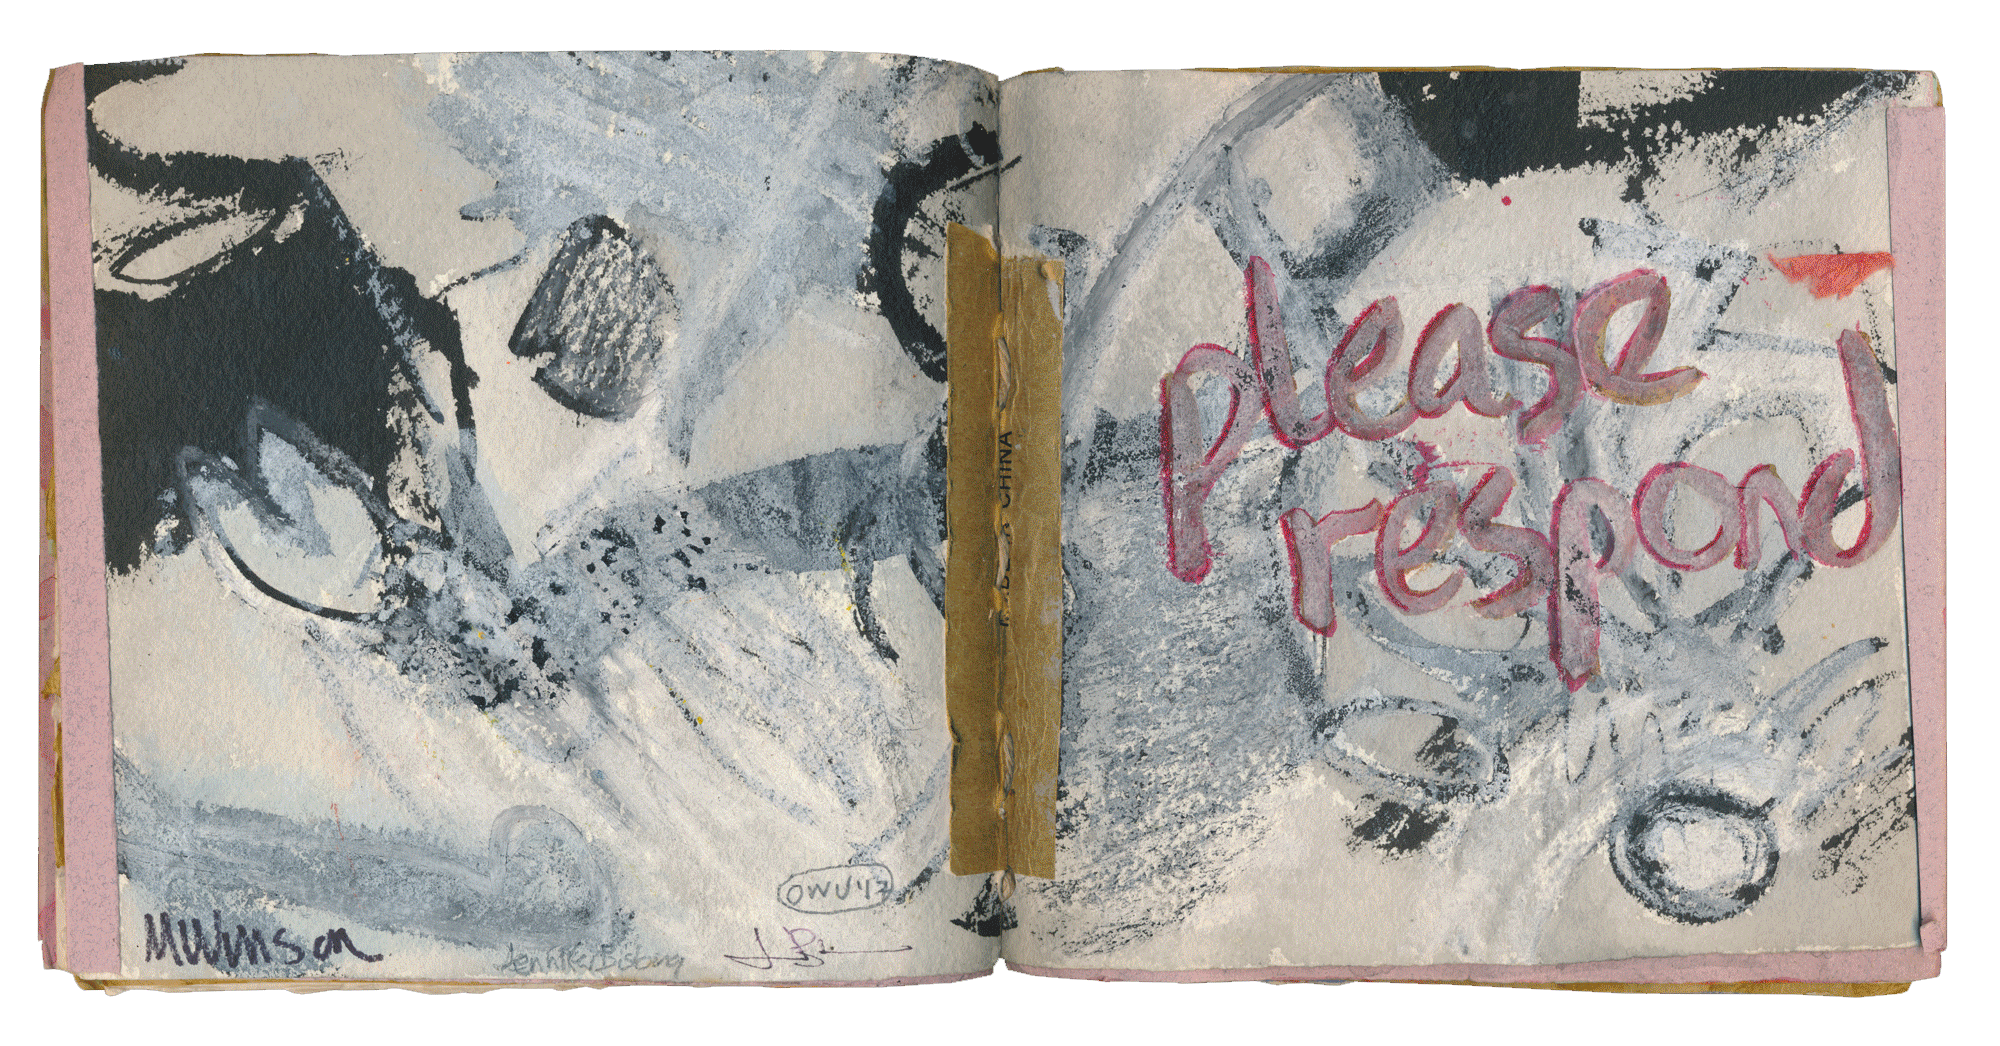   Please Respond   in collaboration with Jennifer Bisbing, 2007, mixed media, 6.5 x 6.75”   PDF available    here    .       